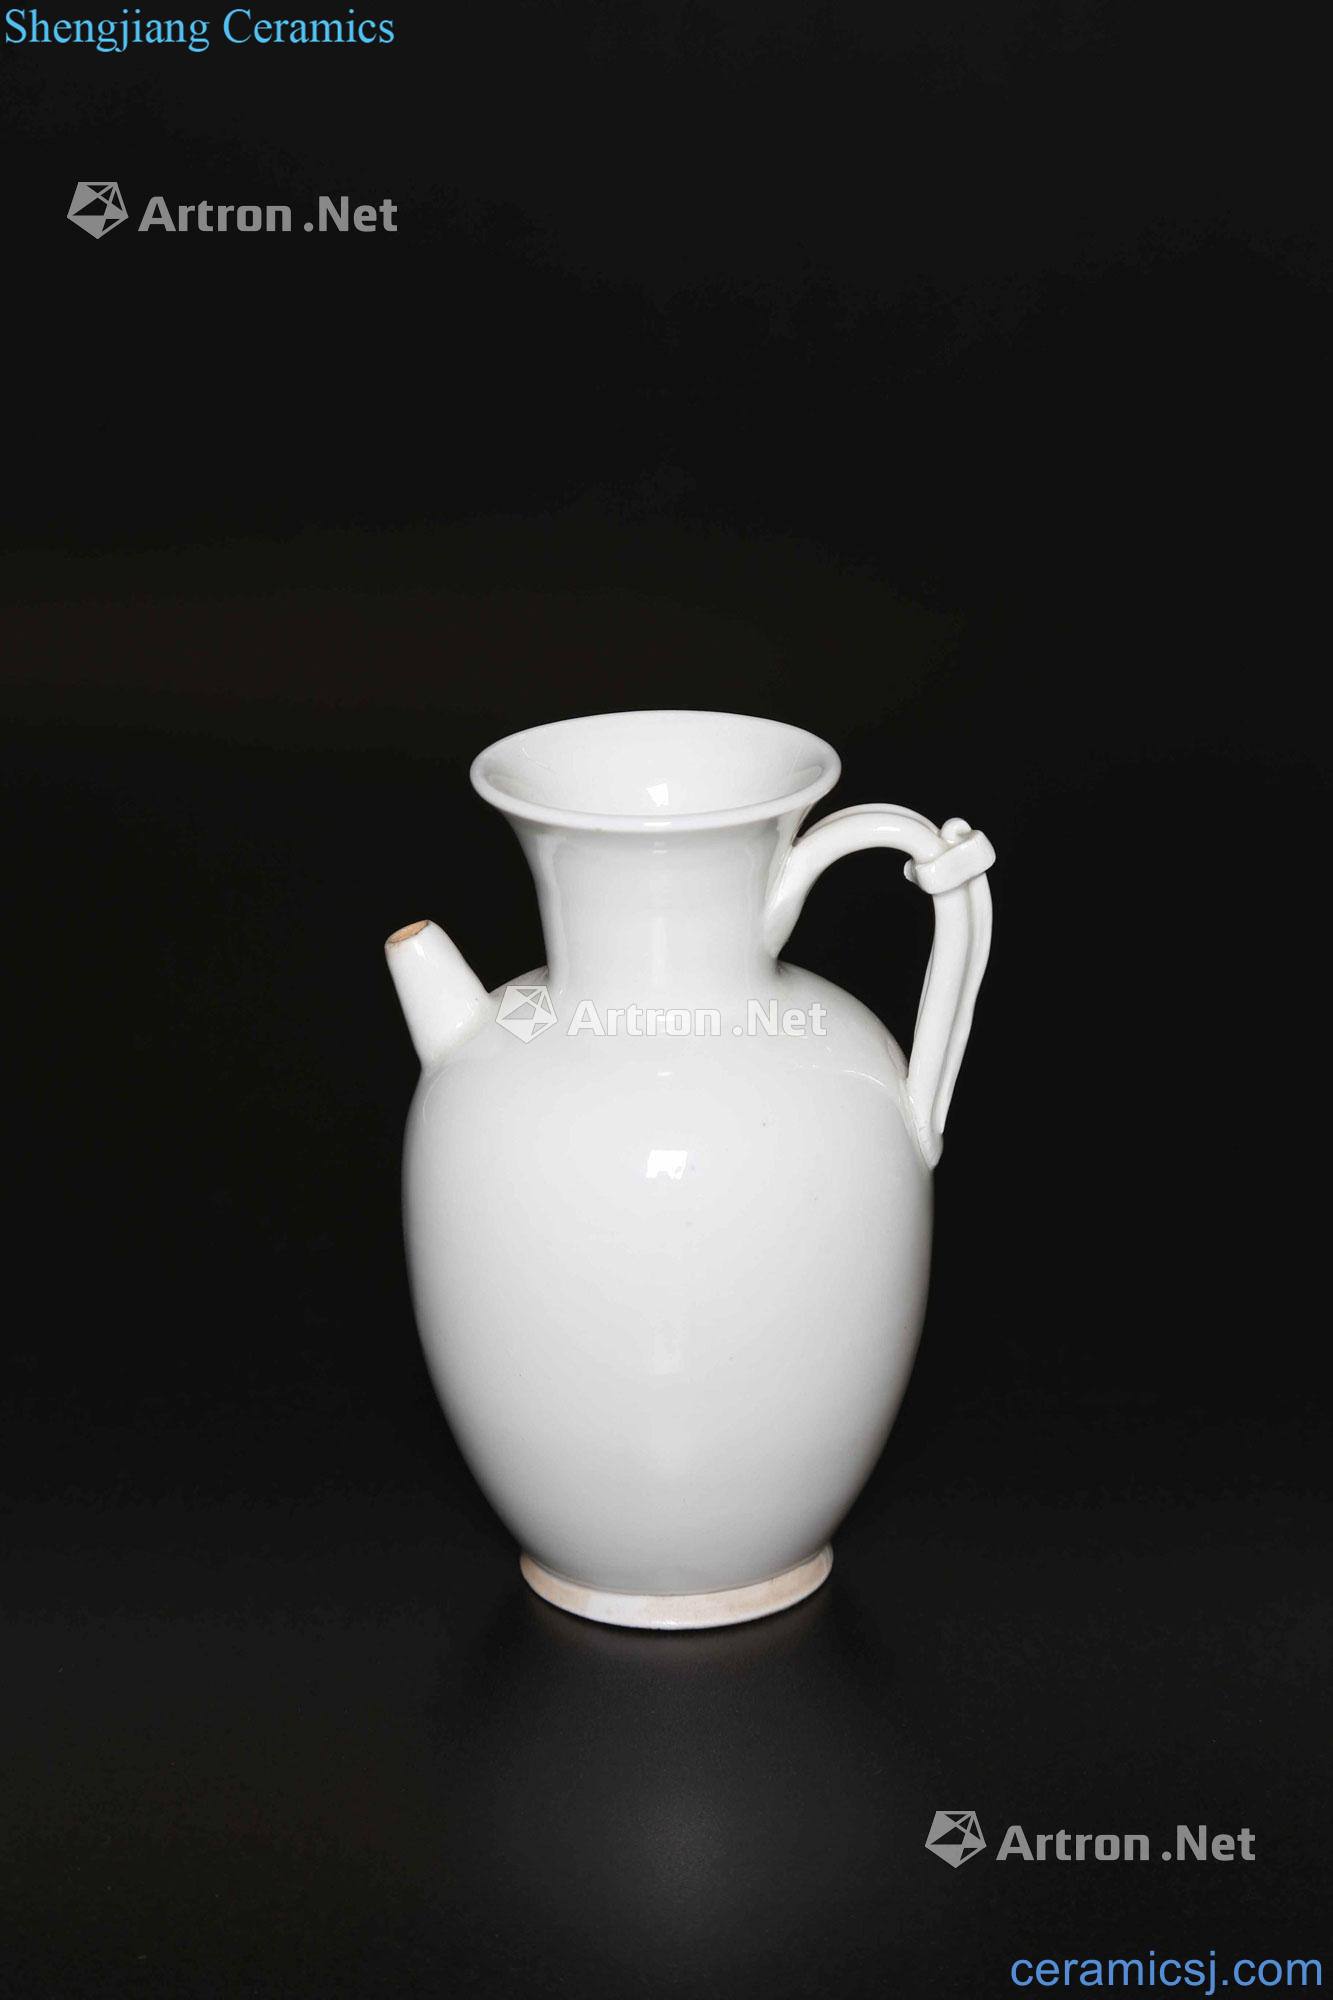 Tang dynasty or later A WHITE PORCELAIN EWERCHINA